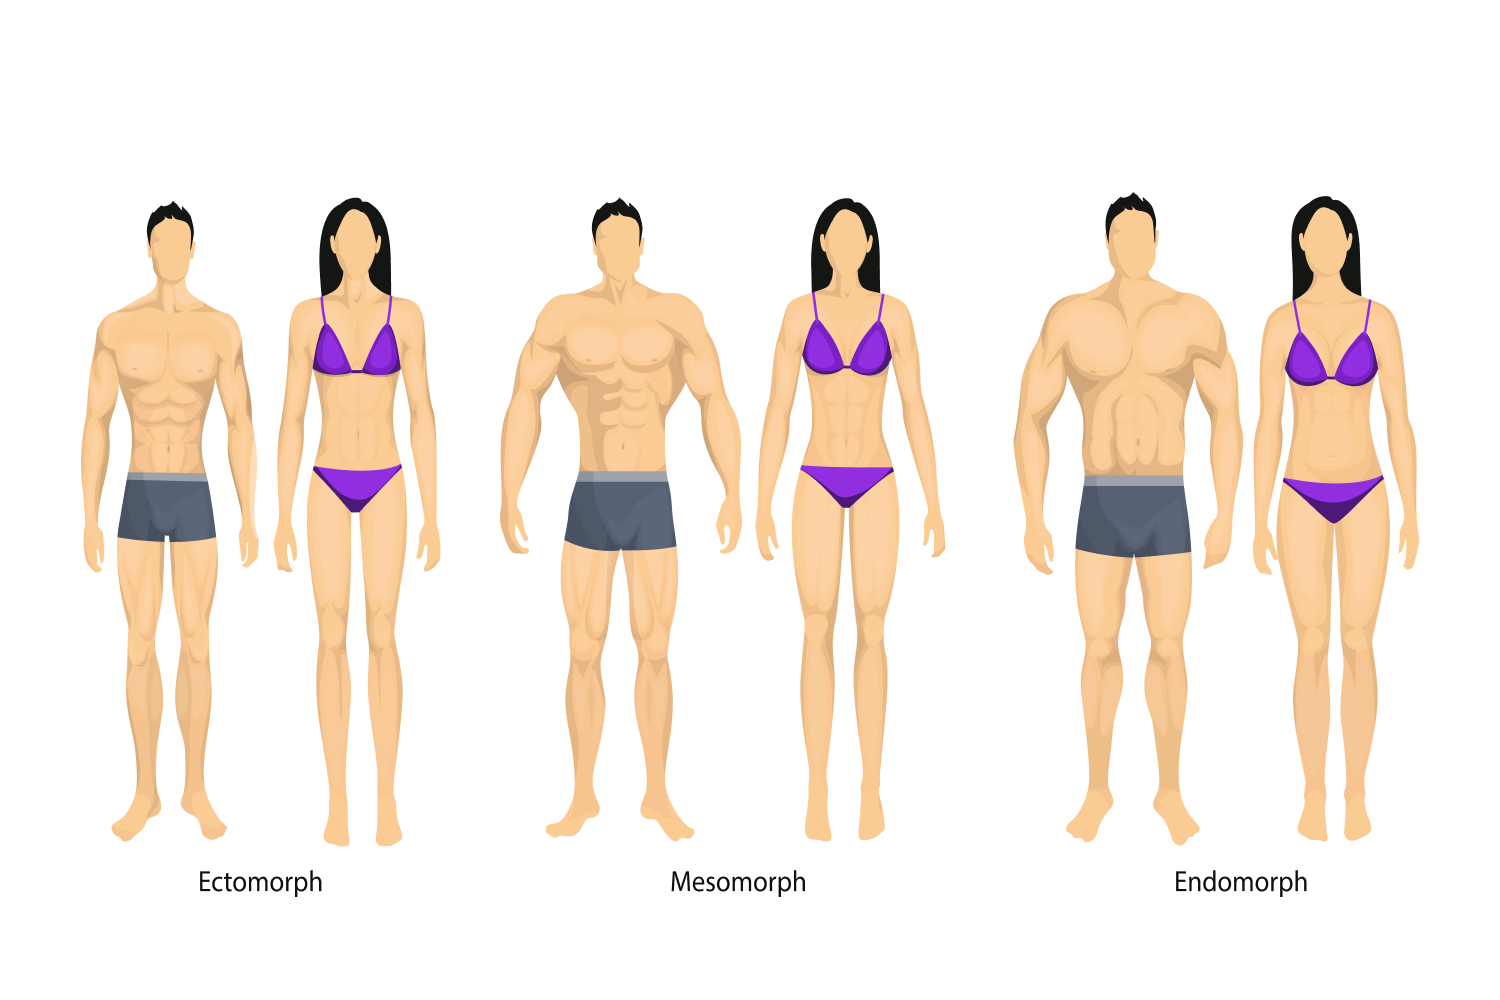 Body Types Are Key to Fitness Goals, Which One Are You?